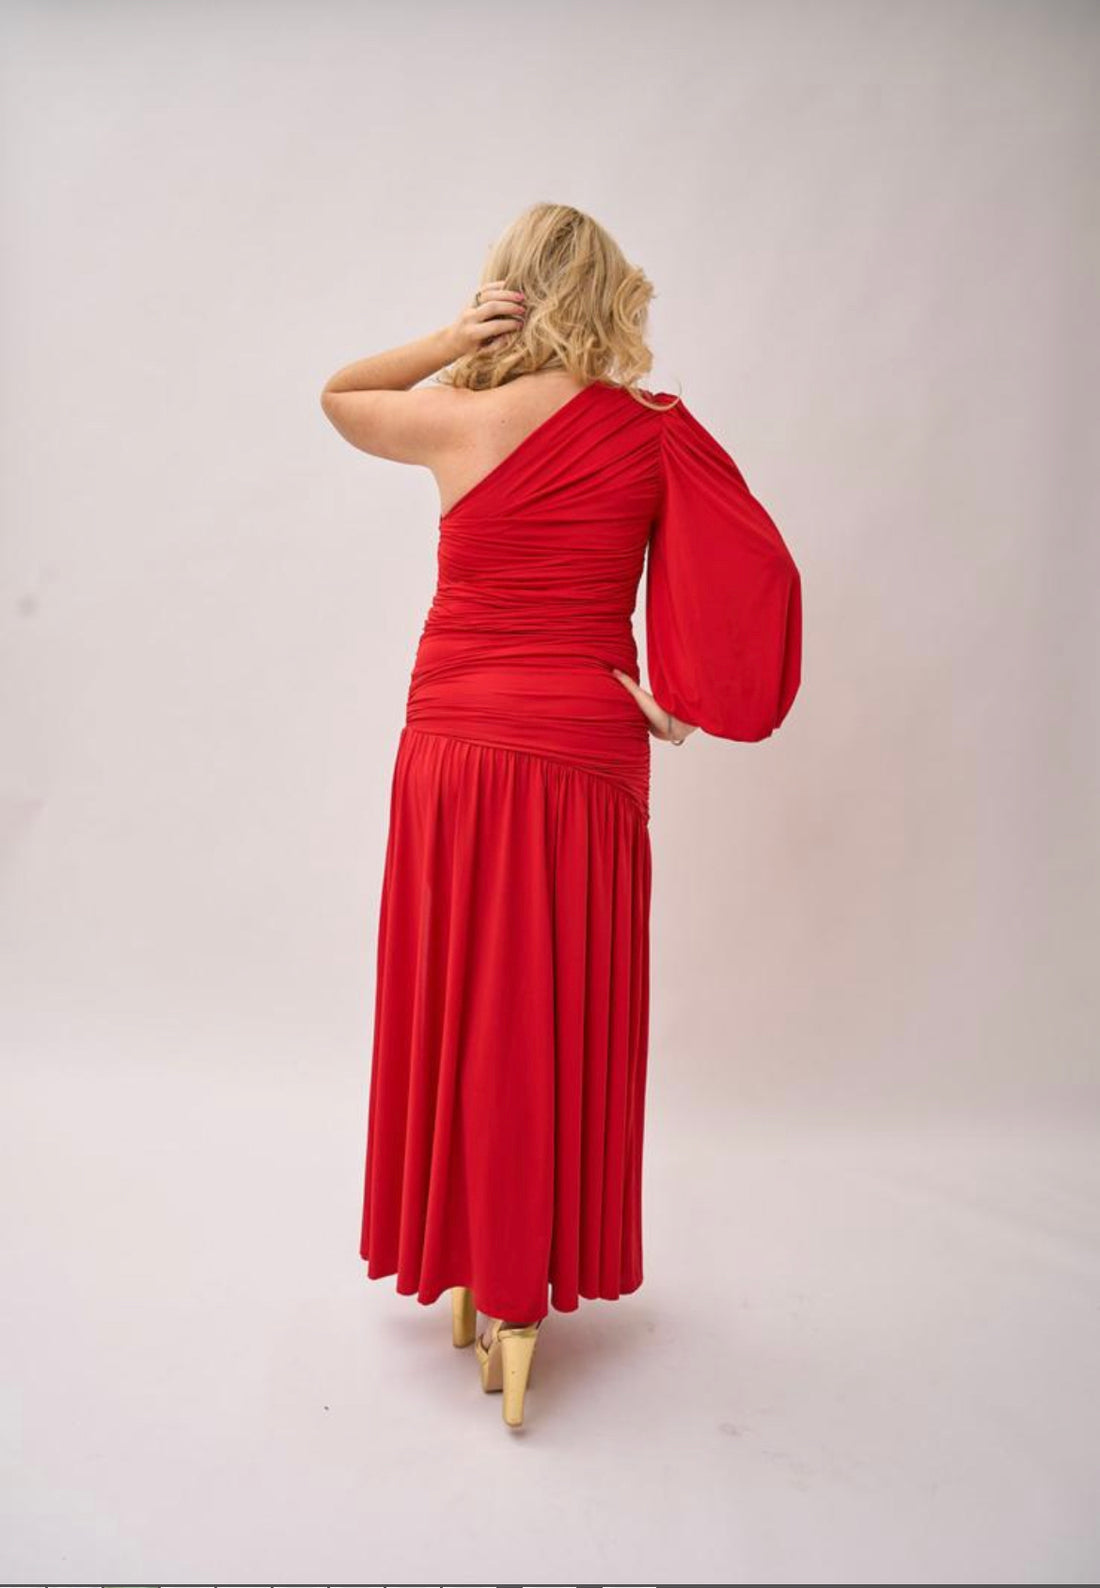 The Leanne Campbell Athena Red one Shoulder Maxi Dress